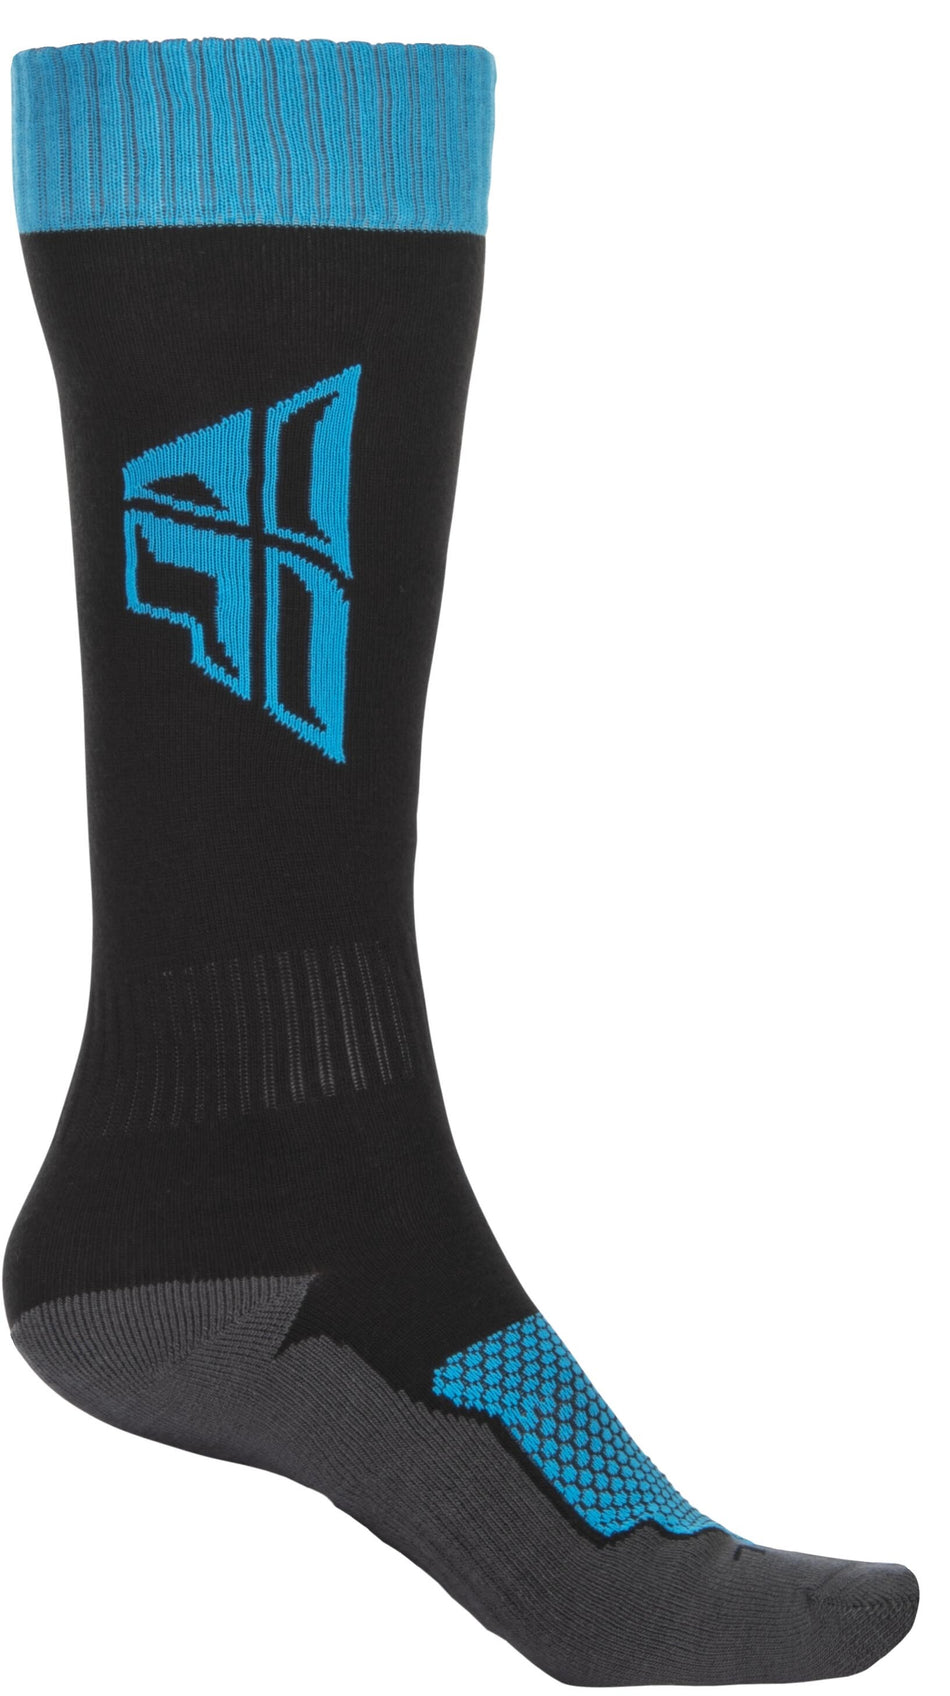 FLY RACING Mx Sock Thick Black/Blue/Grey Sm/Md 350-0514S